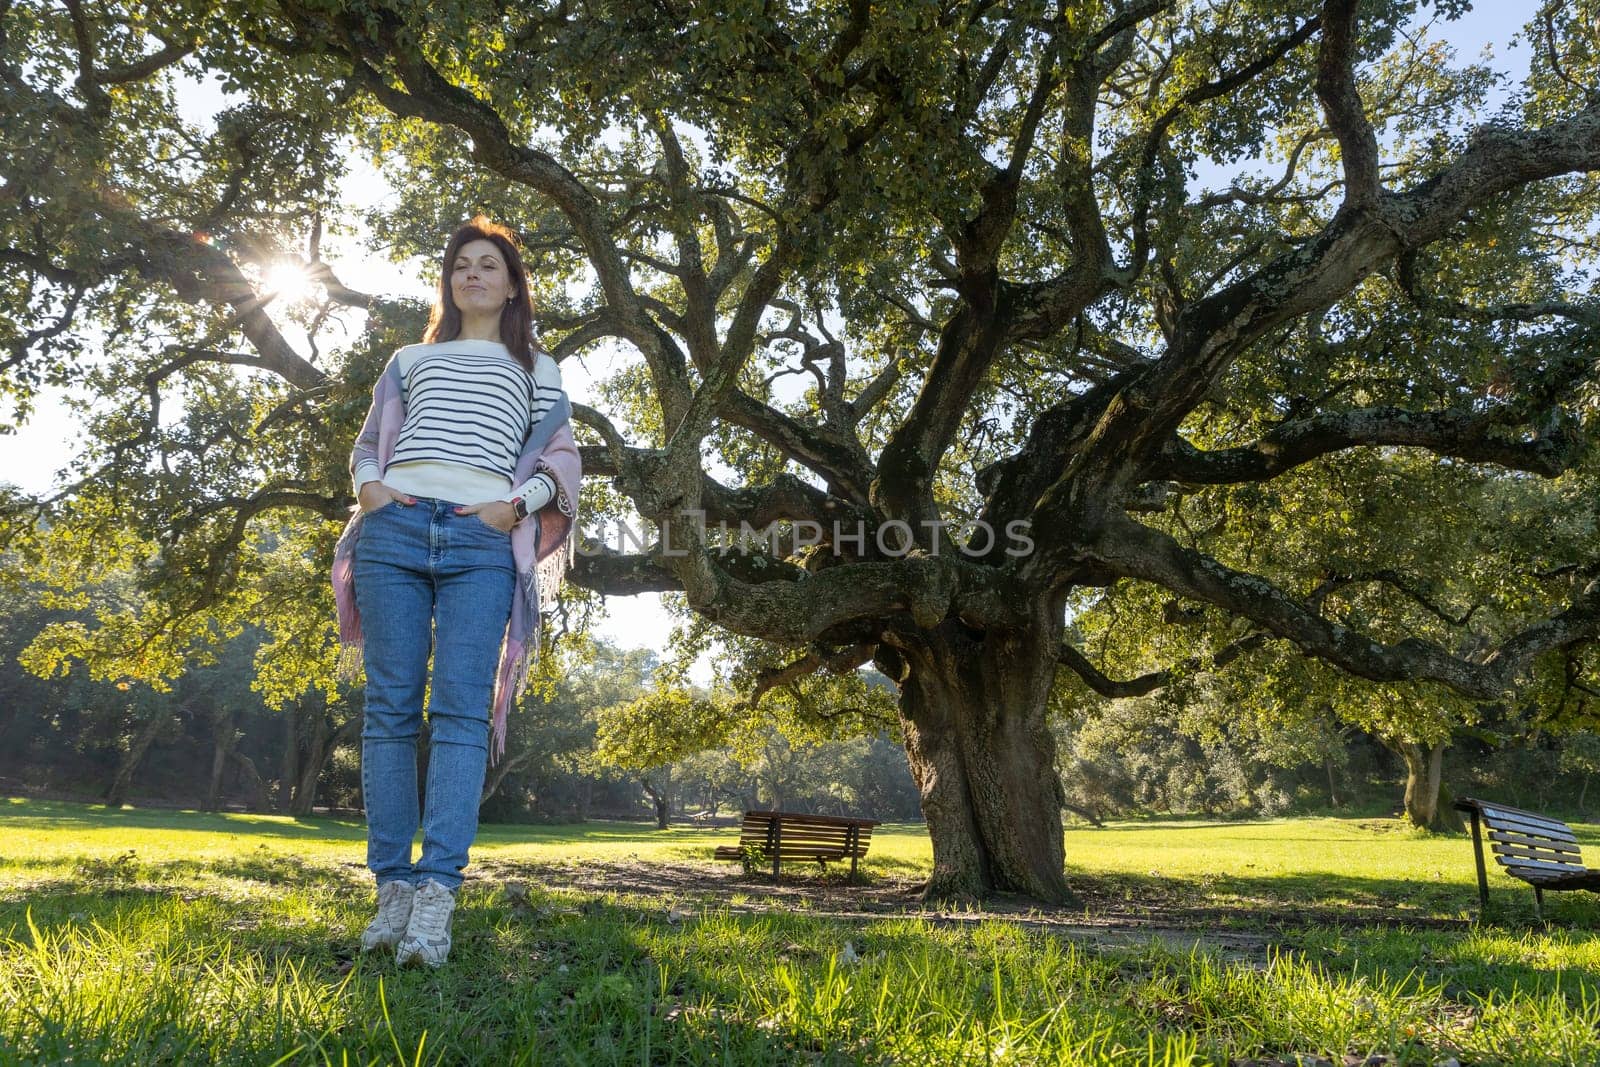 A woman stands in front of a large tree, wearing a white shirt and blue jeans by Studia72